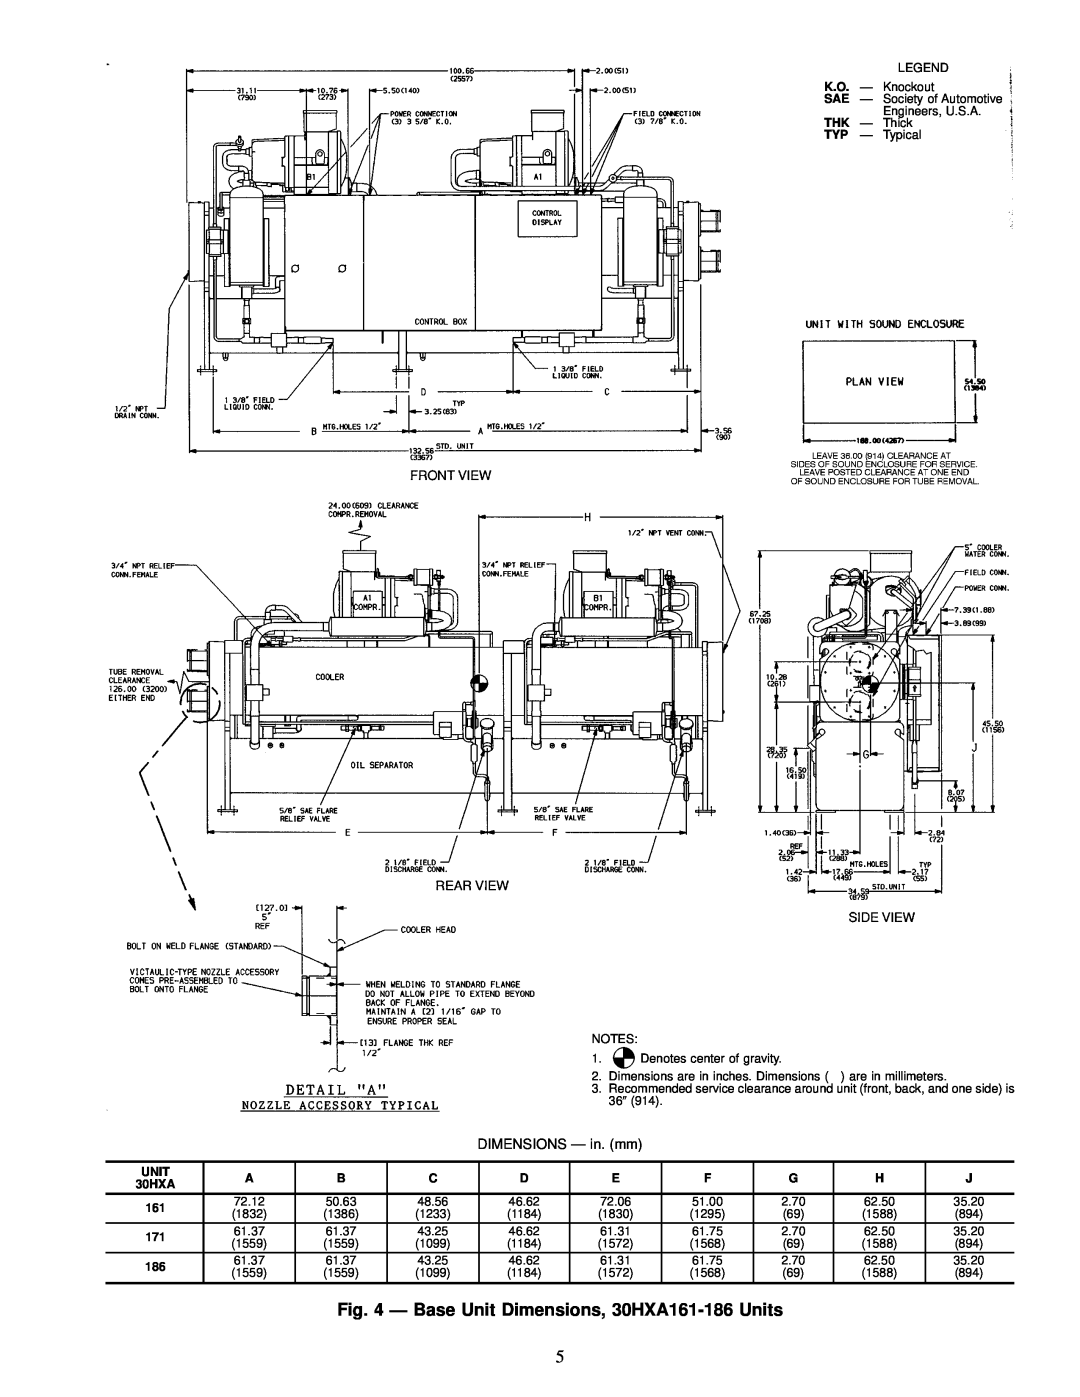 Carrier HXC076-186 Ð Base Unit Dimensions, 30HXA161-186 Units, K.O. Ð, Knockout, Engineers, U.S.A, Thick, Typical 